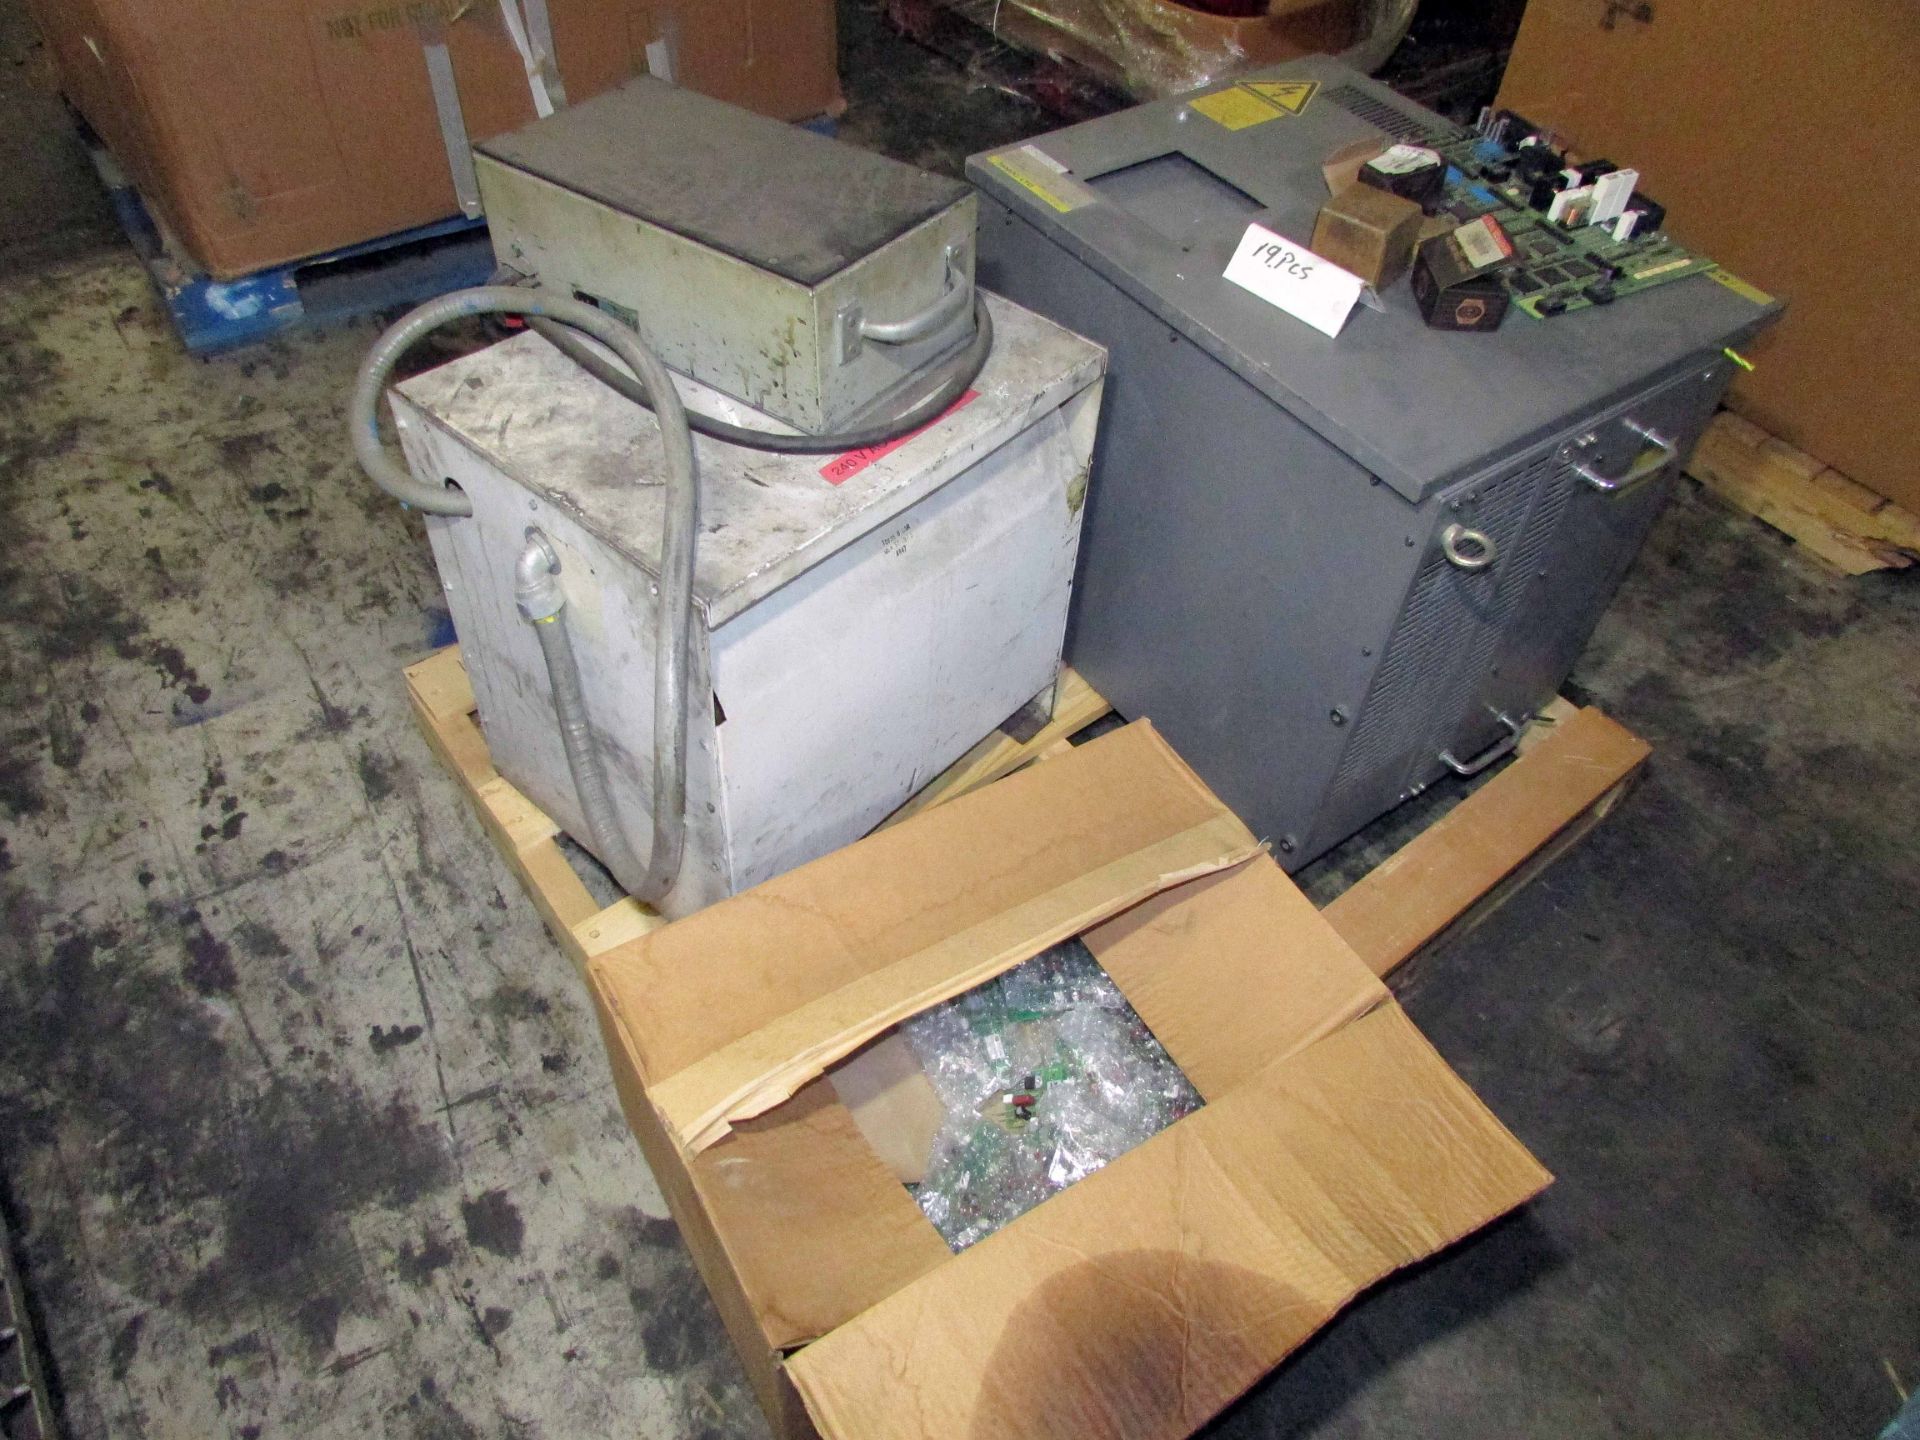 LOT OF SPARE PARTS & CONTENTS, (3) PALLETS: drive belts, hose, Fanuc robot controller, electrical - Image 5 of 6